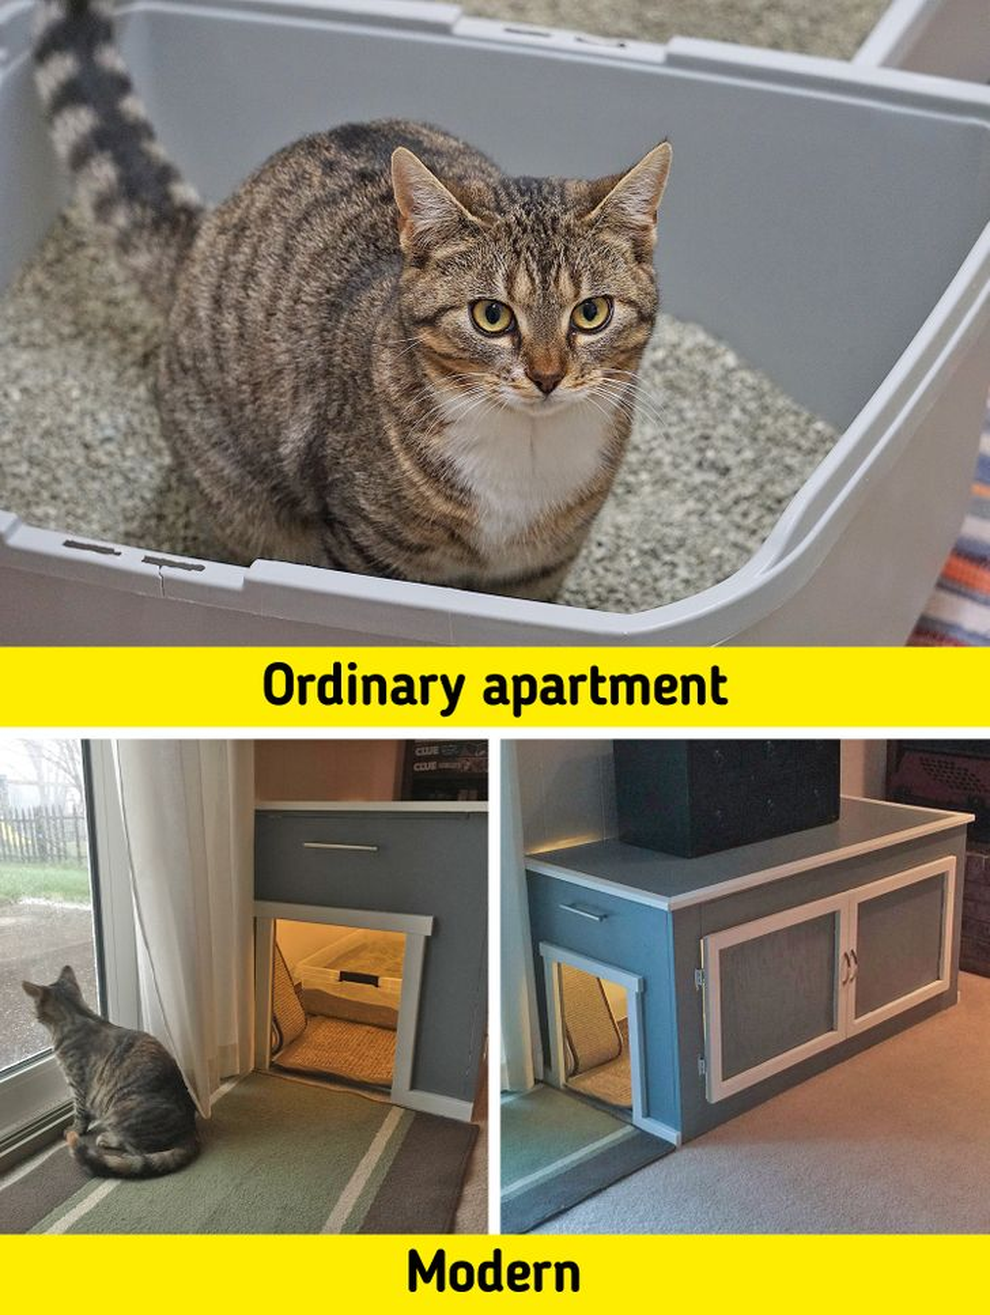 Turn an ordinary apartment into a modern one with just 10 simple items - 8